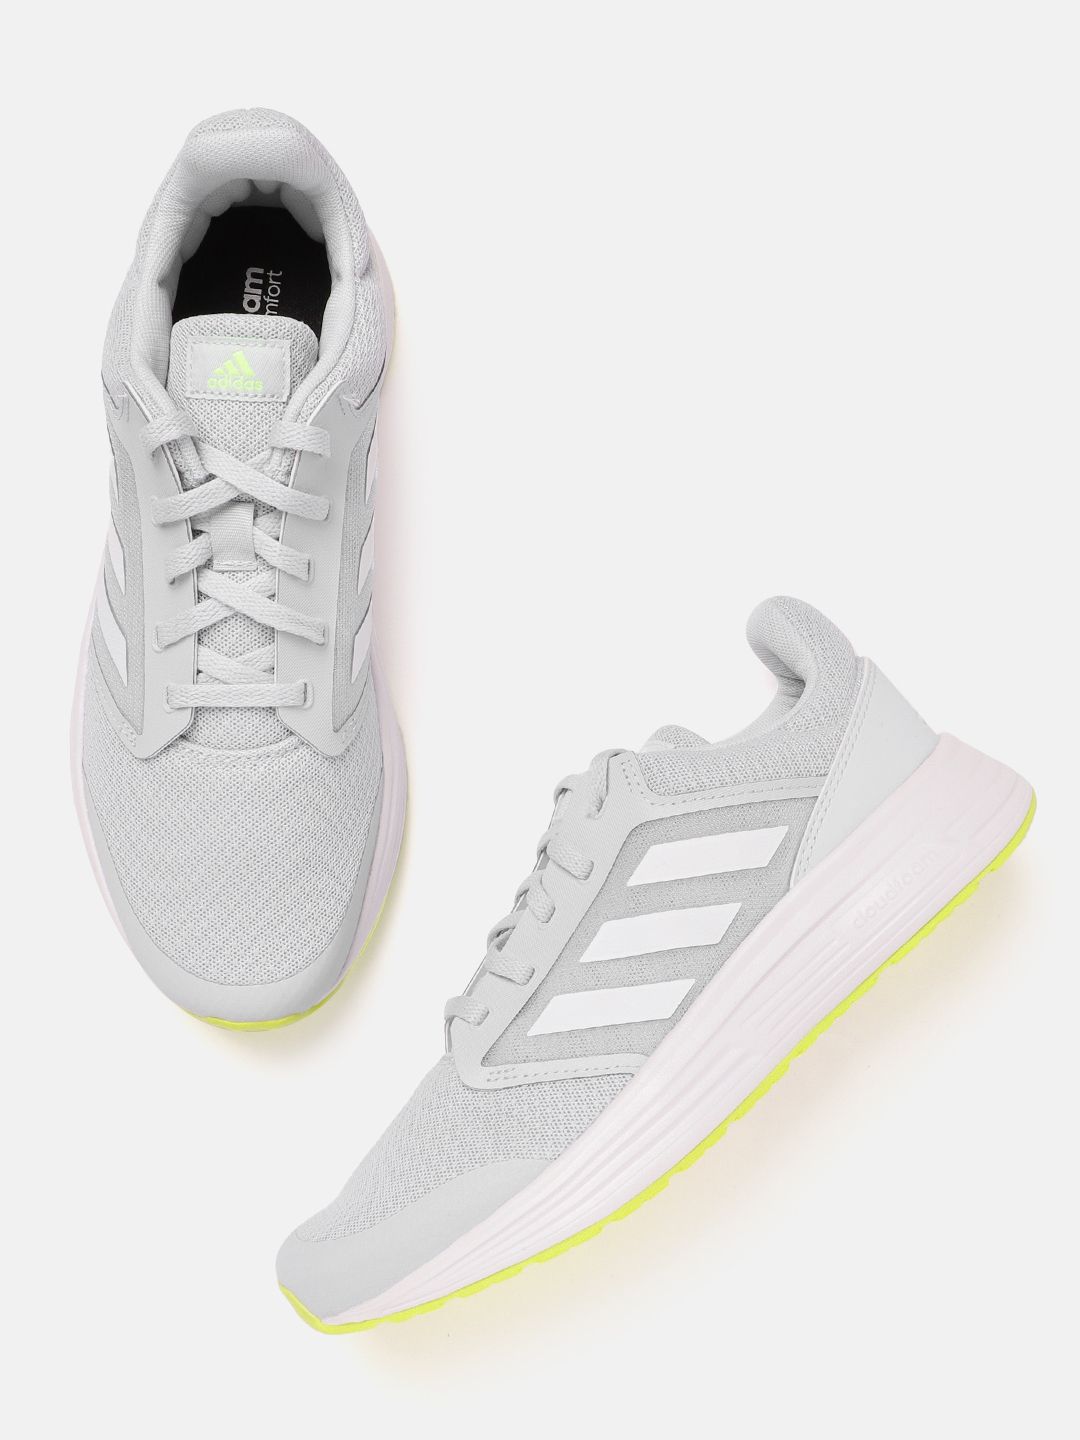 ADIDAS Women Grey Woven Design Galaxy 5 Running Shoes Price in India